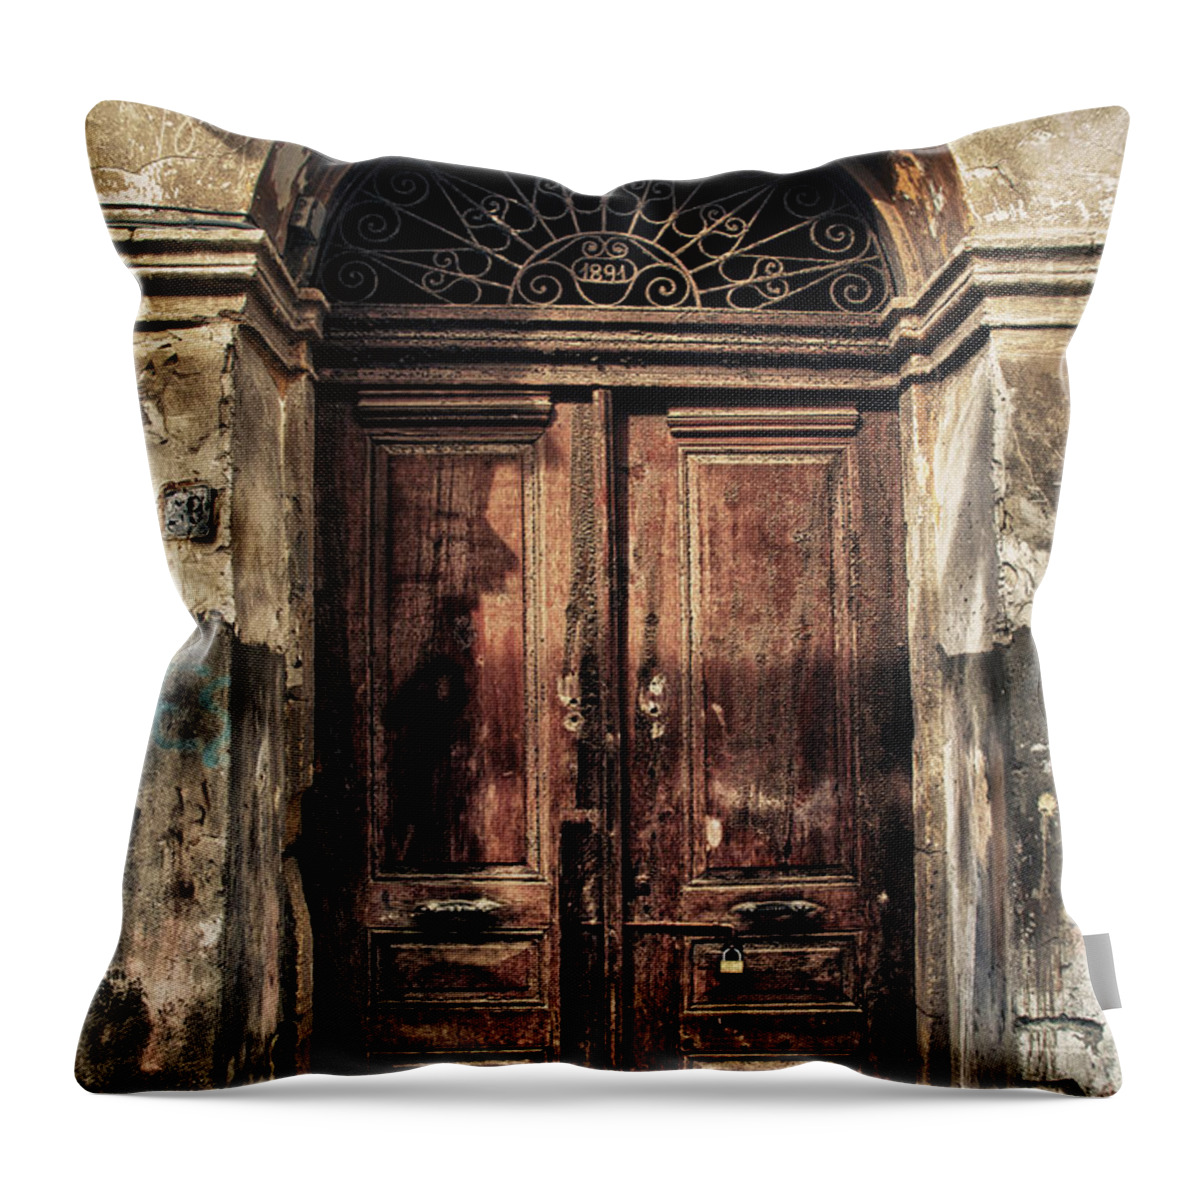 Ancient Throw Pillow featuring the photograph 1891 Door Cyprus by Stelios Kleanthous